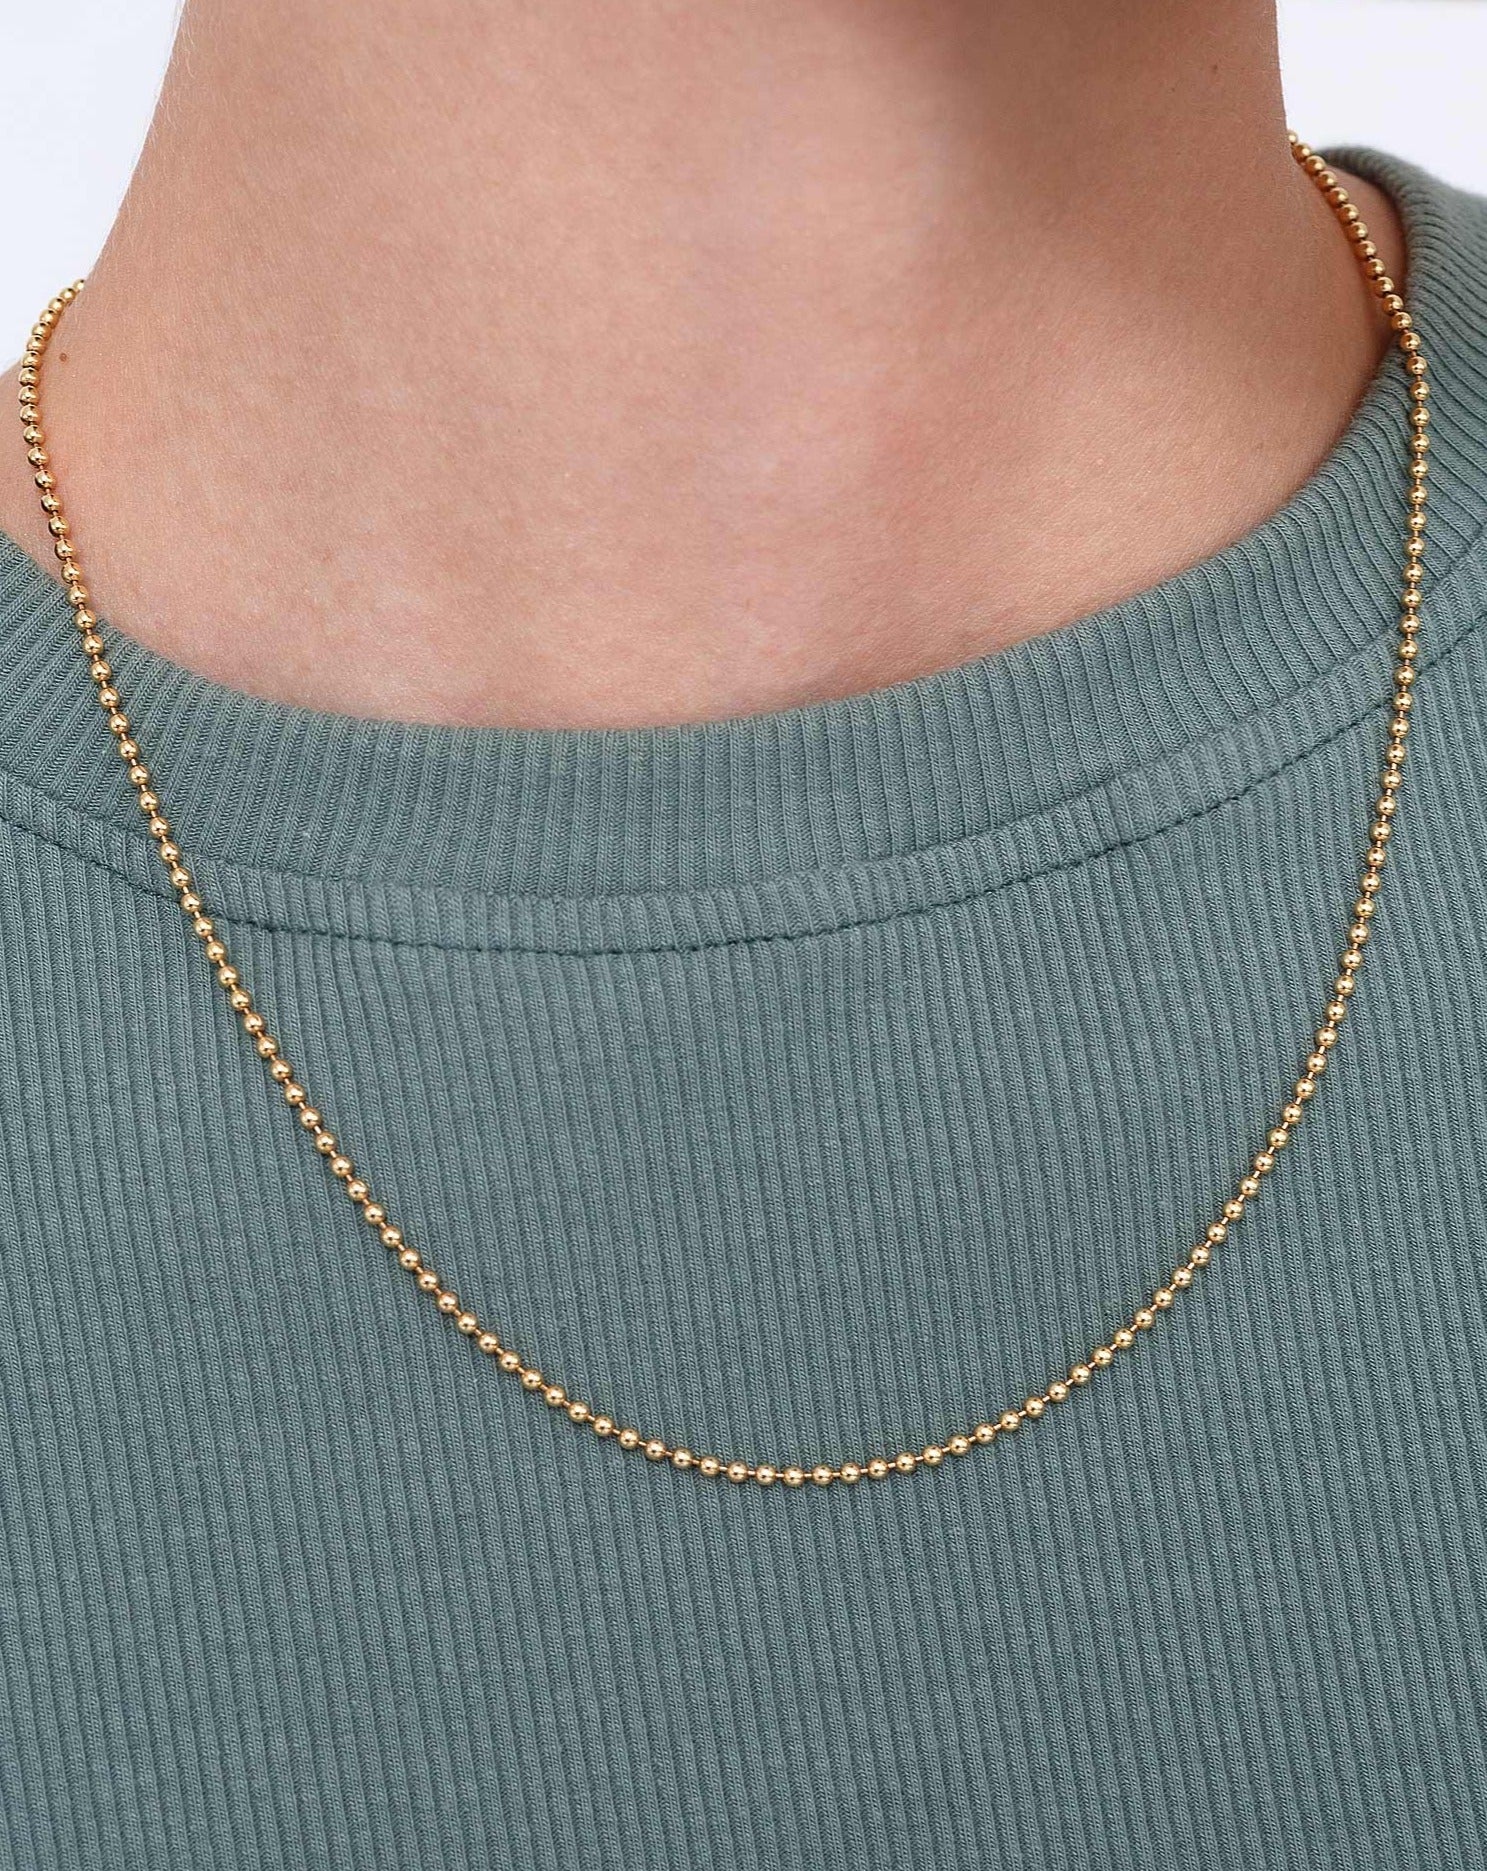 2.0mm Solid Gold Bead Chain - Sparkle Society